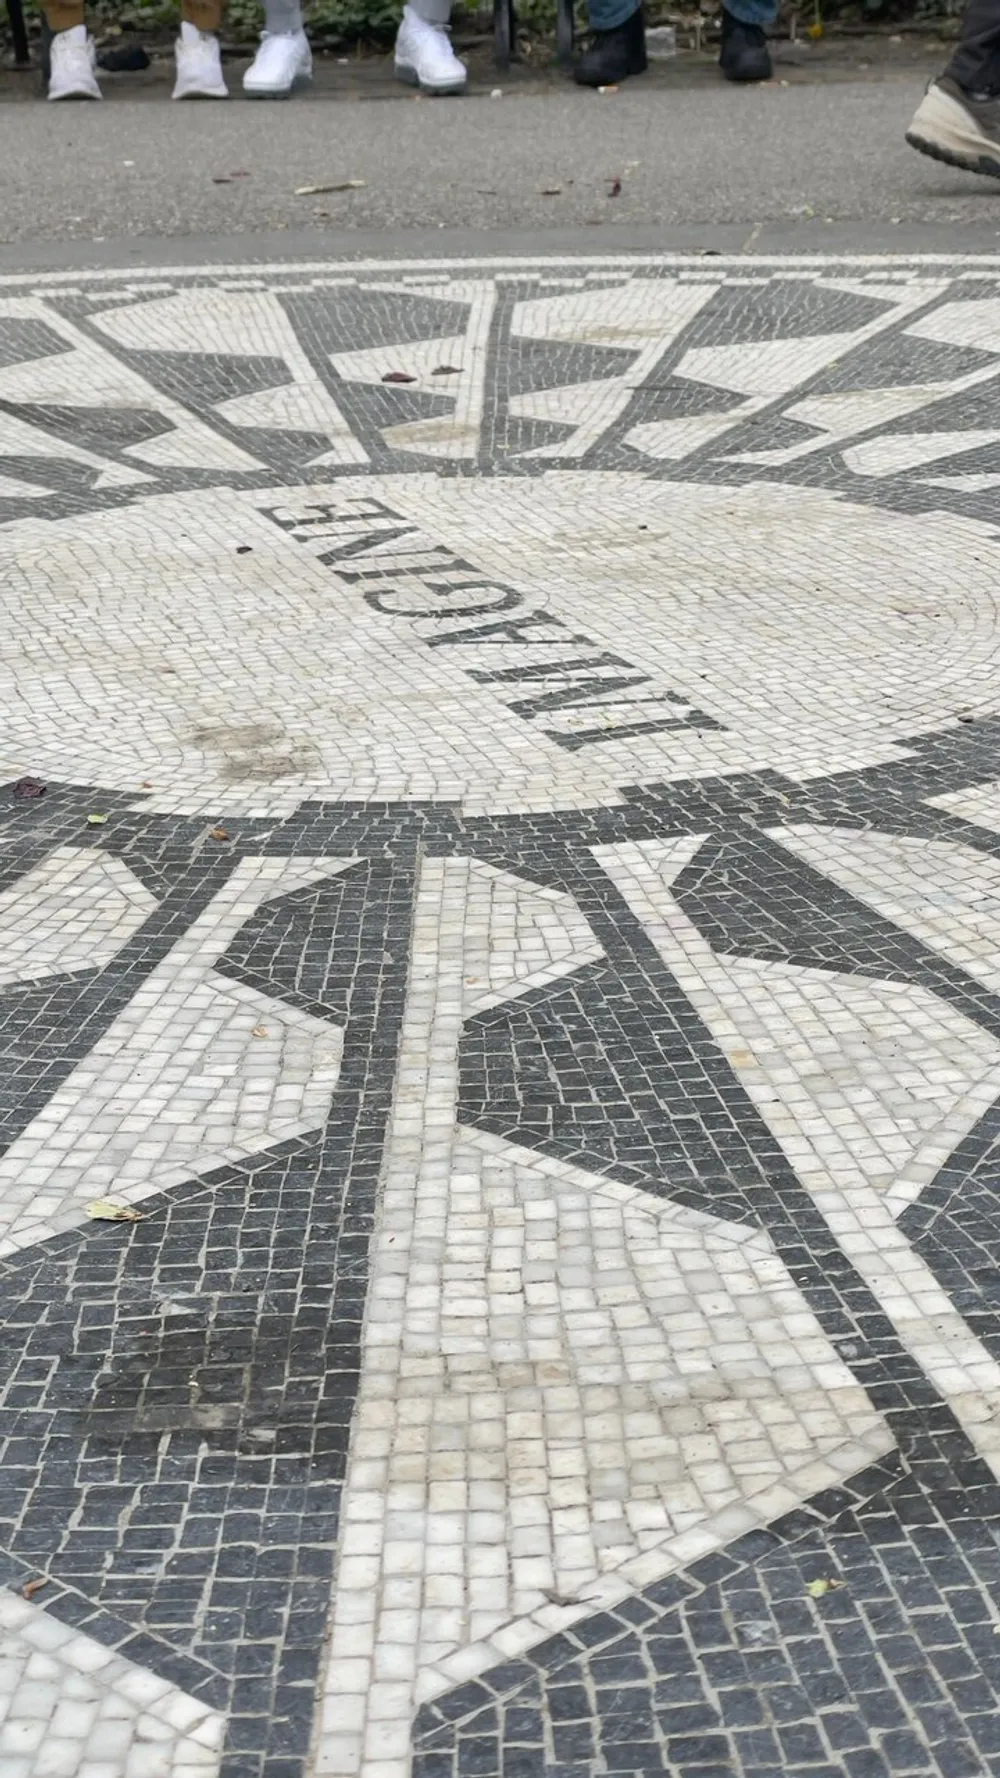 This image shows a detailed mosaic pavement with geometric patterns and the word Imagine prominently displayed with the lower half of the photo revealing the feet of people walking by